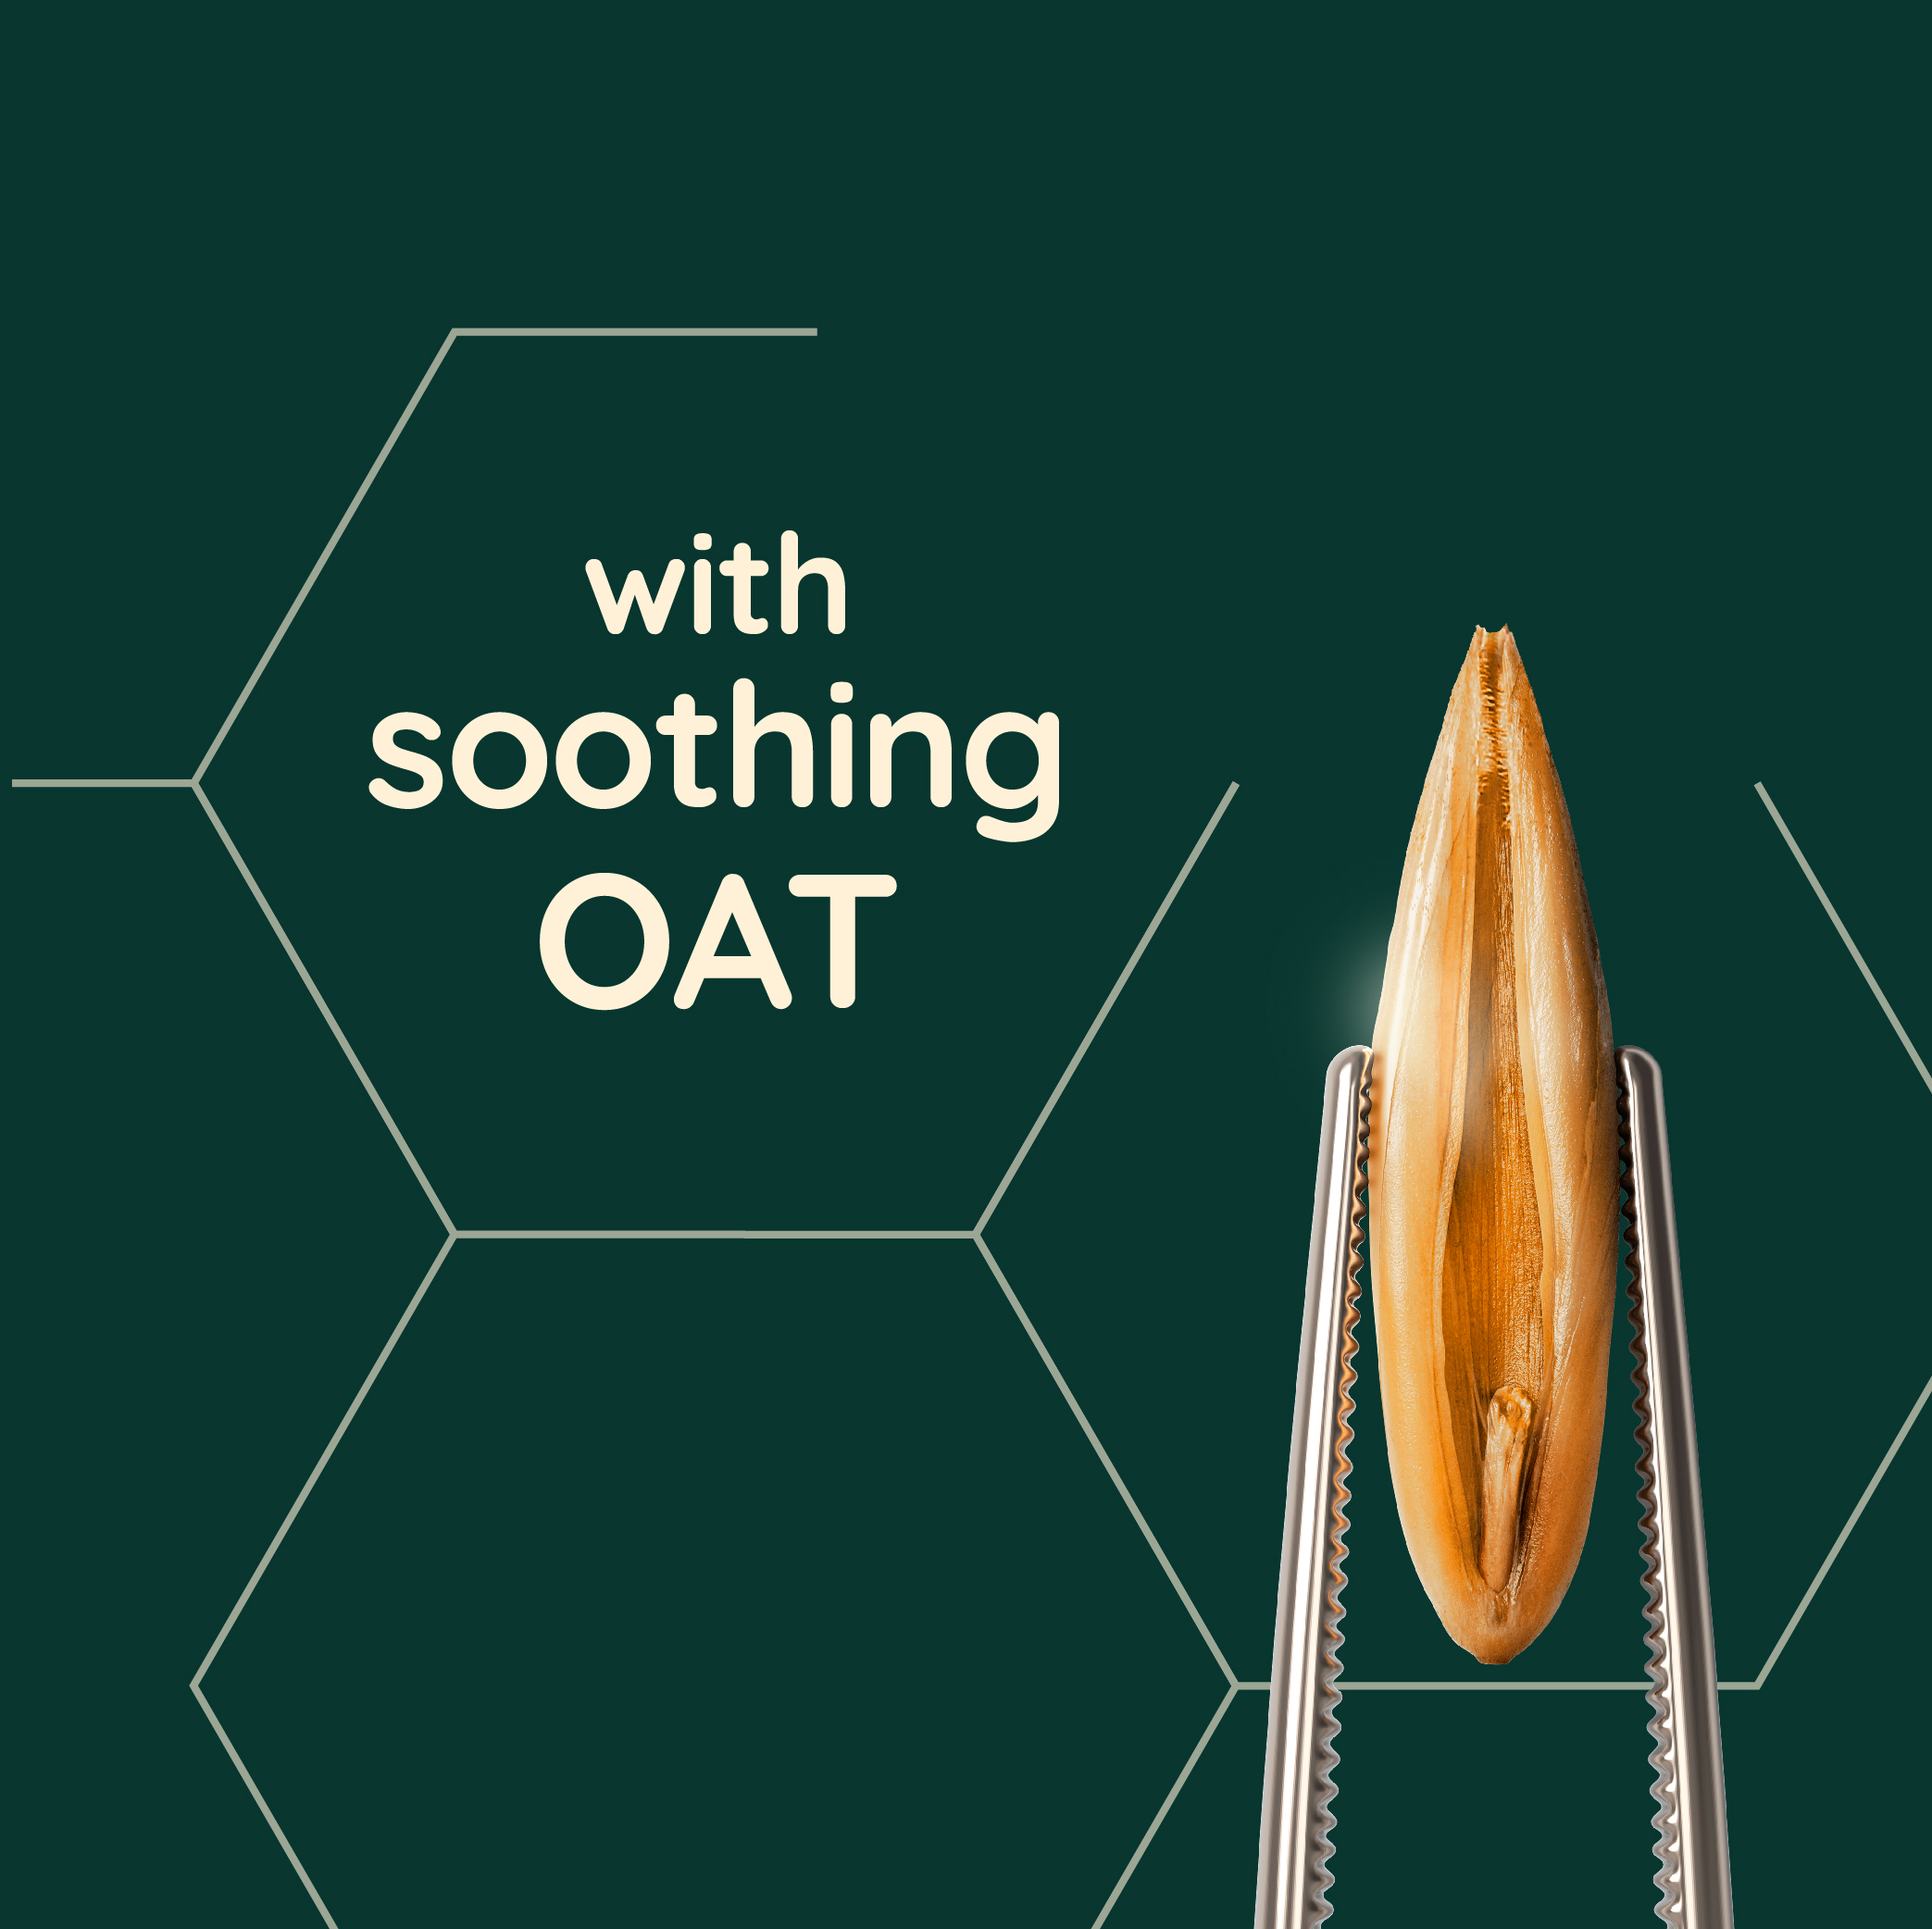 with soothing oat